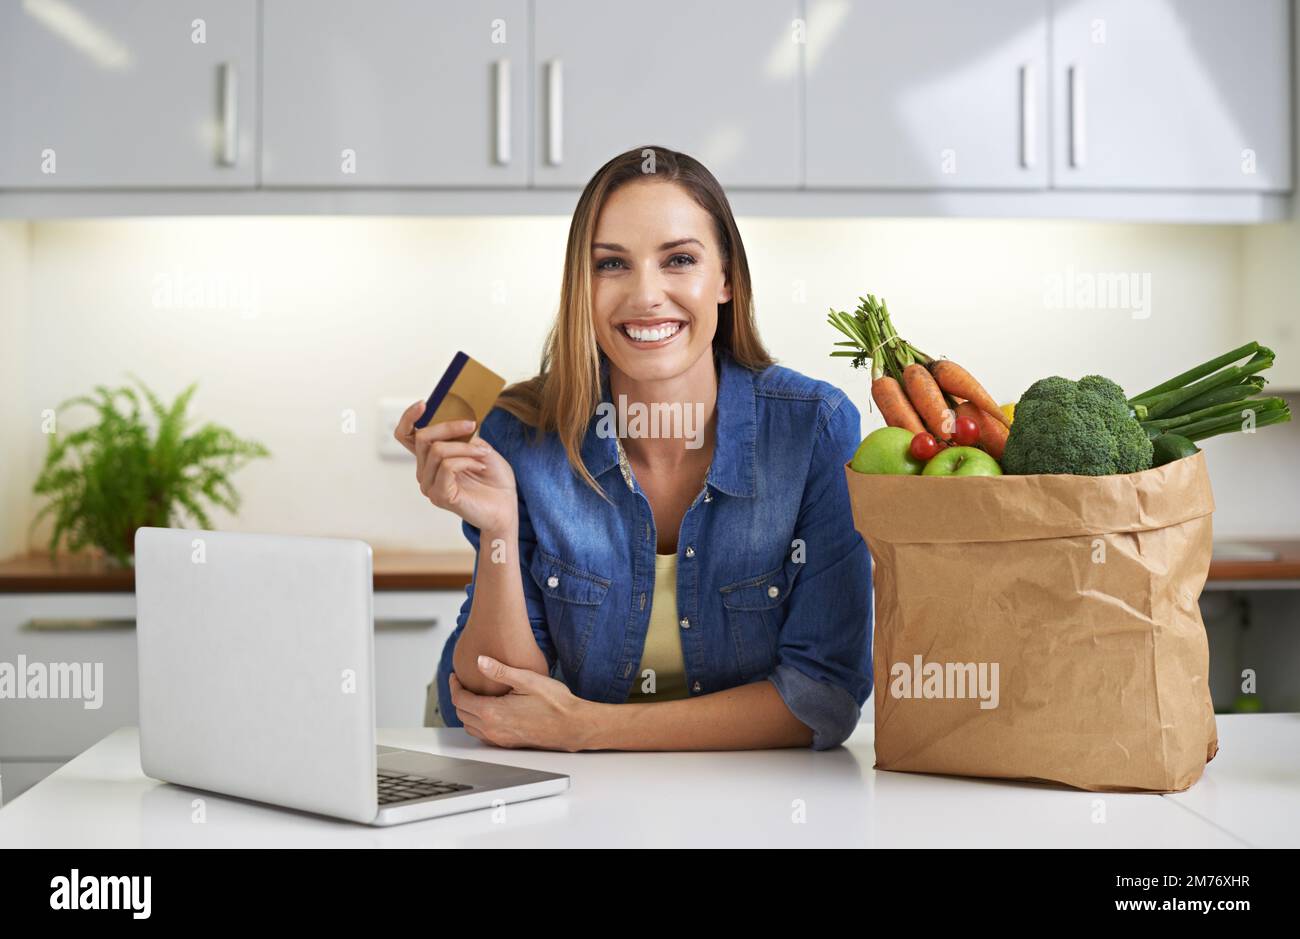 Making shopping a breeze. a young woman doing some online shopping with her groceries beside her. Stock Photo